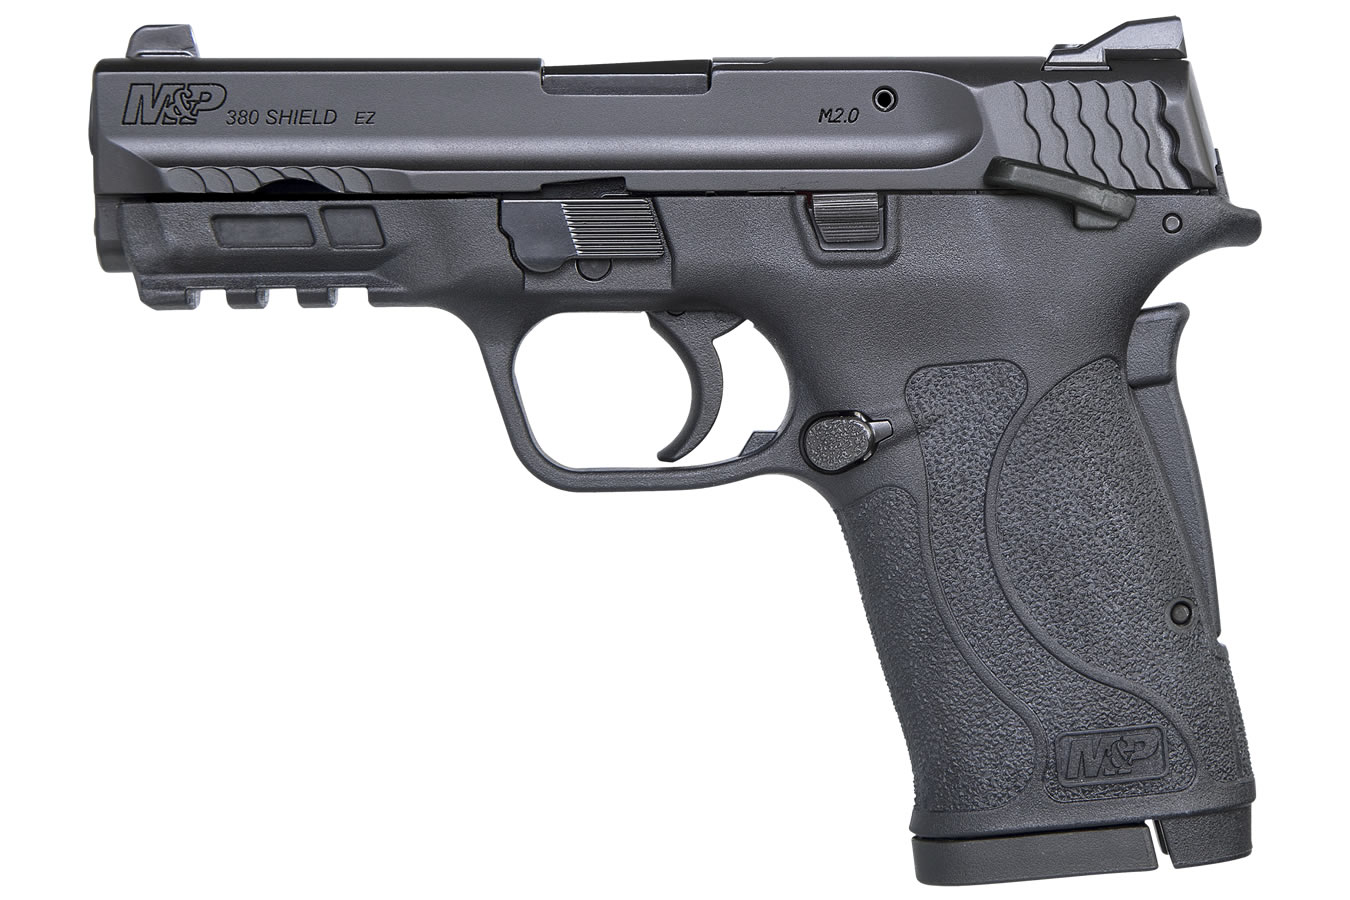 No. 8 Best Selling: SMITH AND WESSON MP380 SHIELD 380 ACP PISTOL W/ THUMB SAFETY